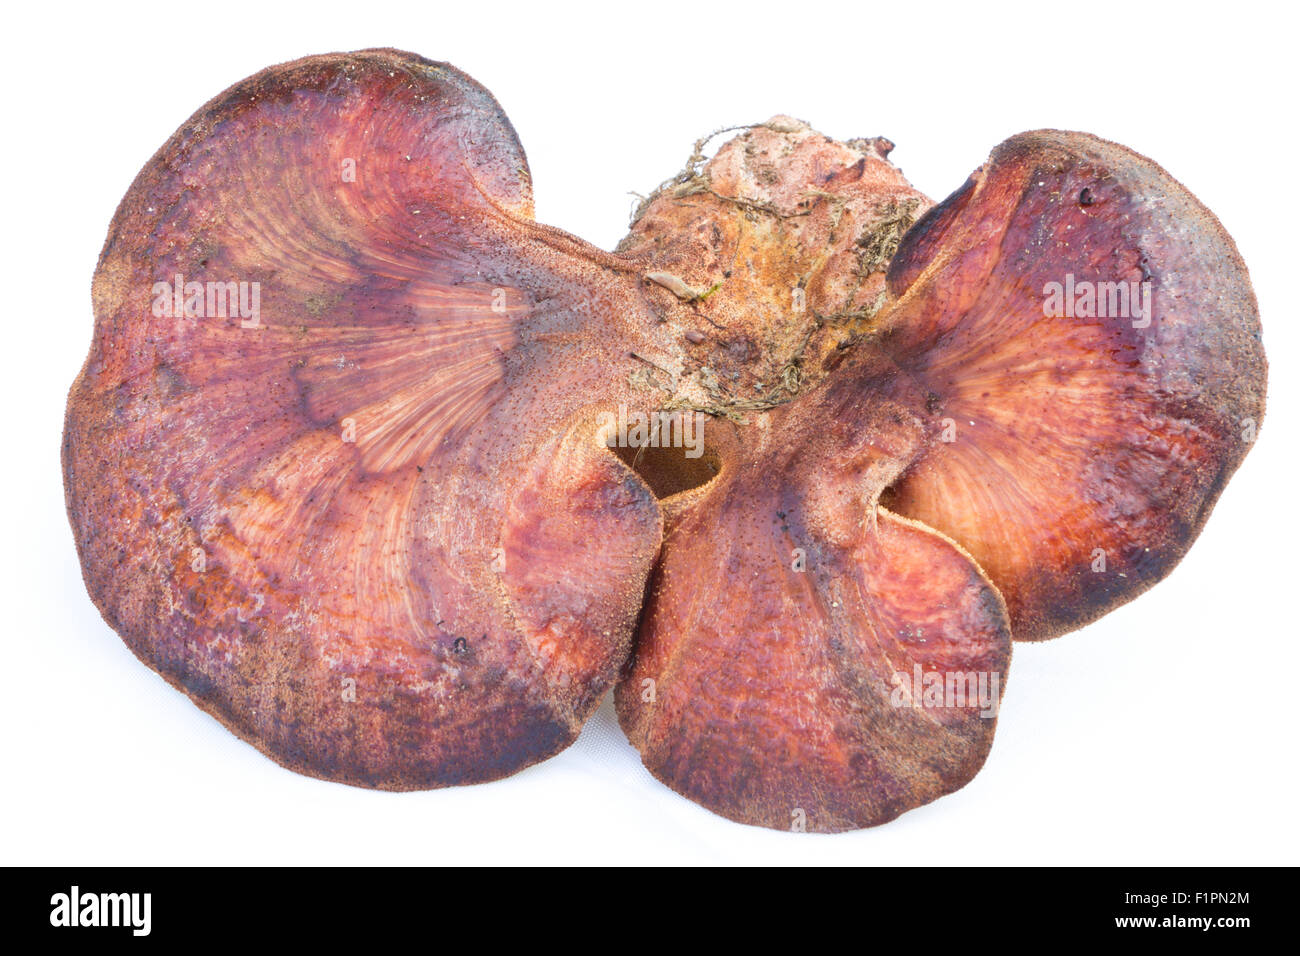 Fistulina hepatica mushroom, also known as the beefsteak polypore or the ox tongue. Stock Photo